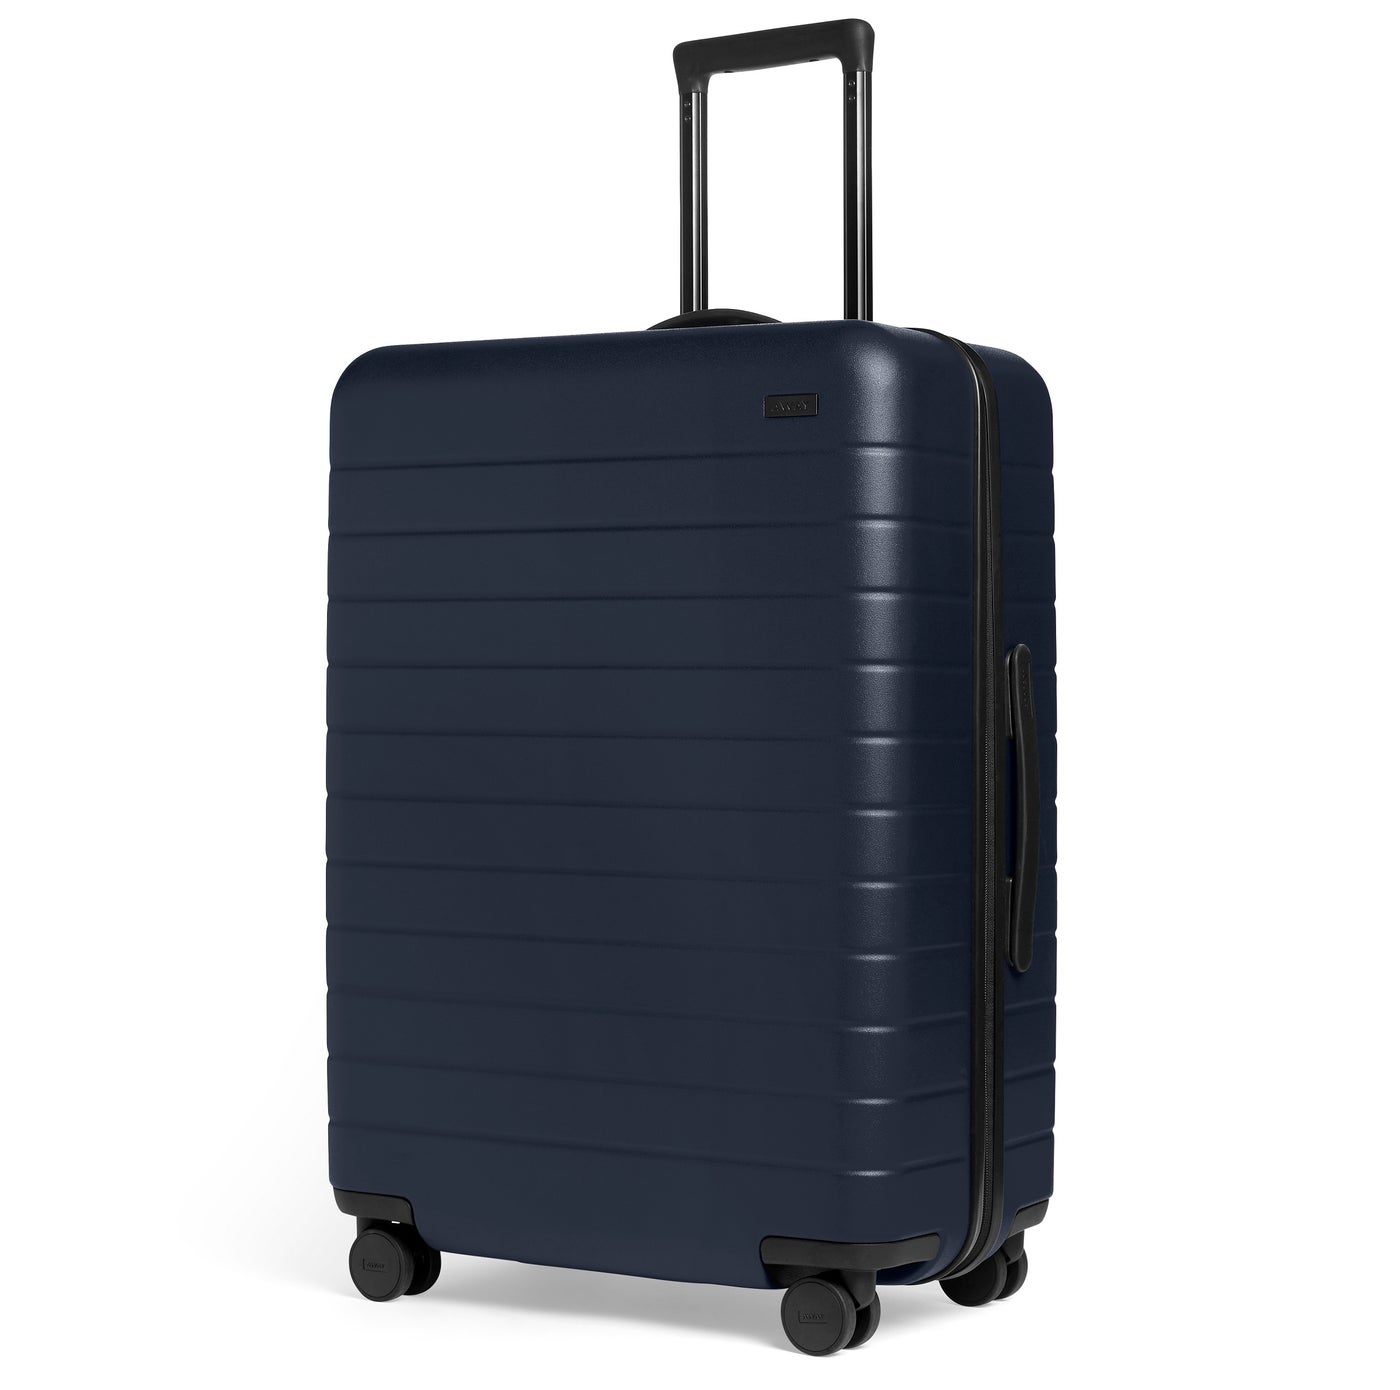 Away now has expandable hard-sided suitcase options